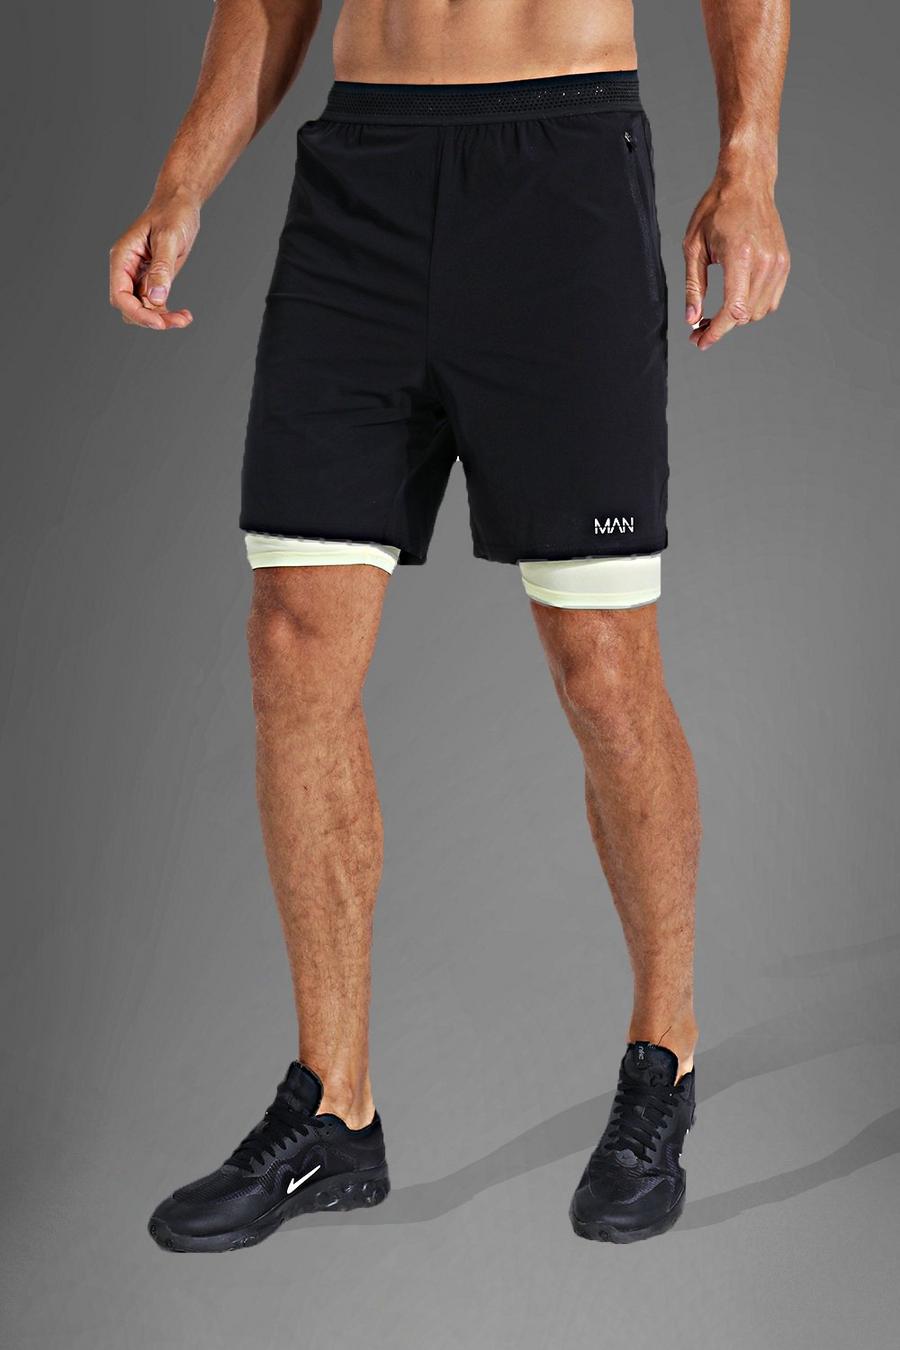 Black Tall Lichte Monochrome Man Active 2-In-1 Shorts image number 1